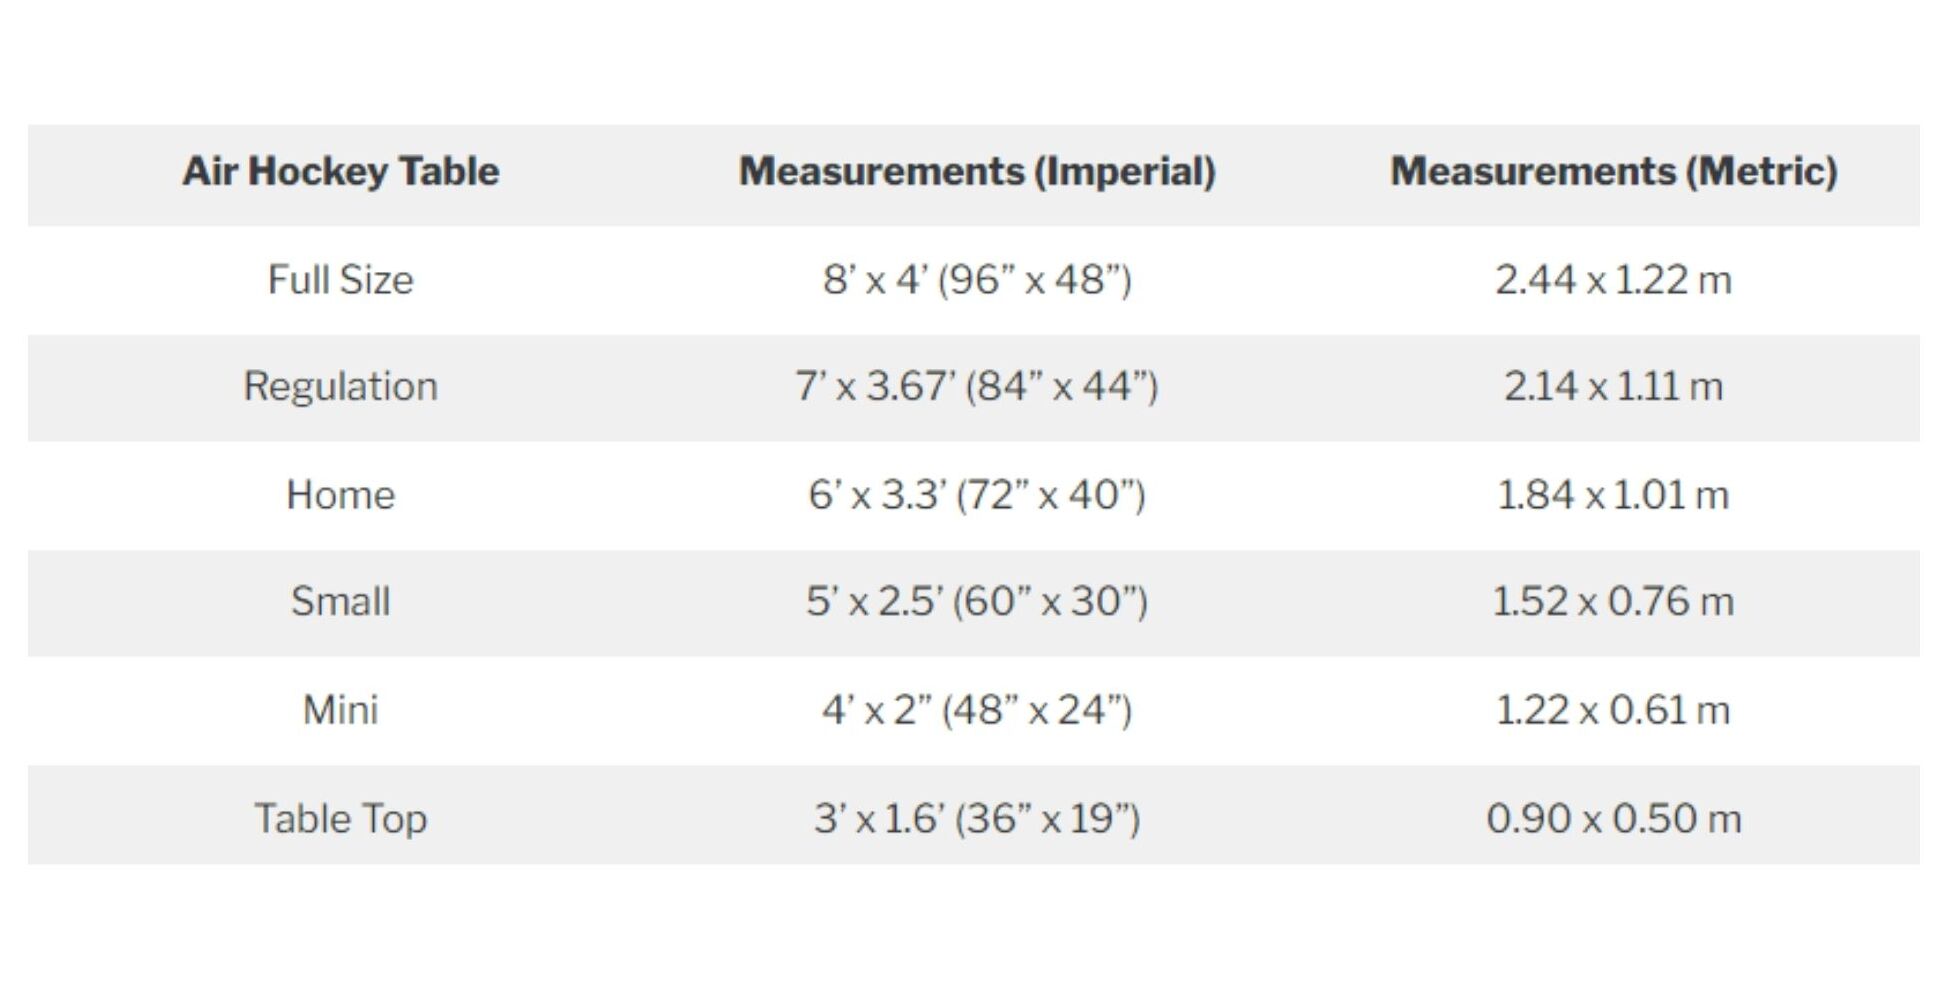 A table that shows difefrent rows including air hockey table, imperical measurements and metric measurements